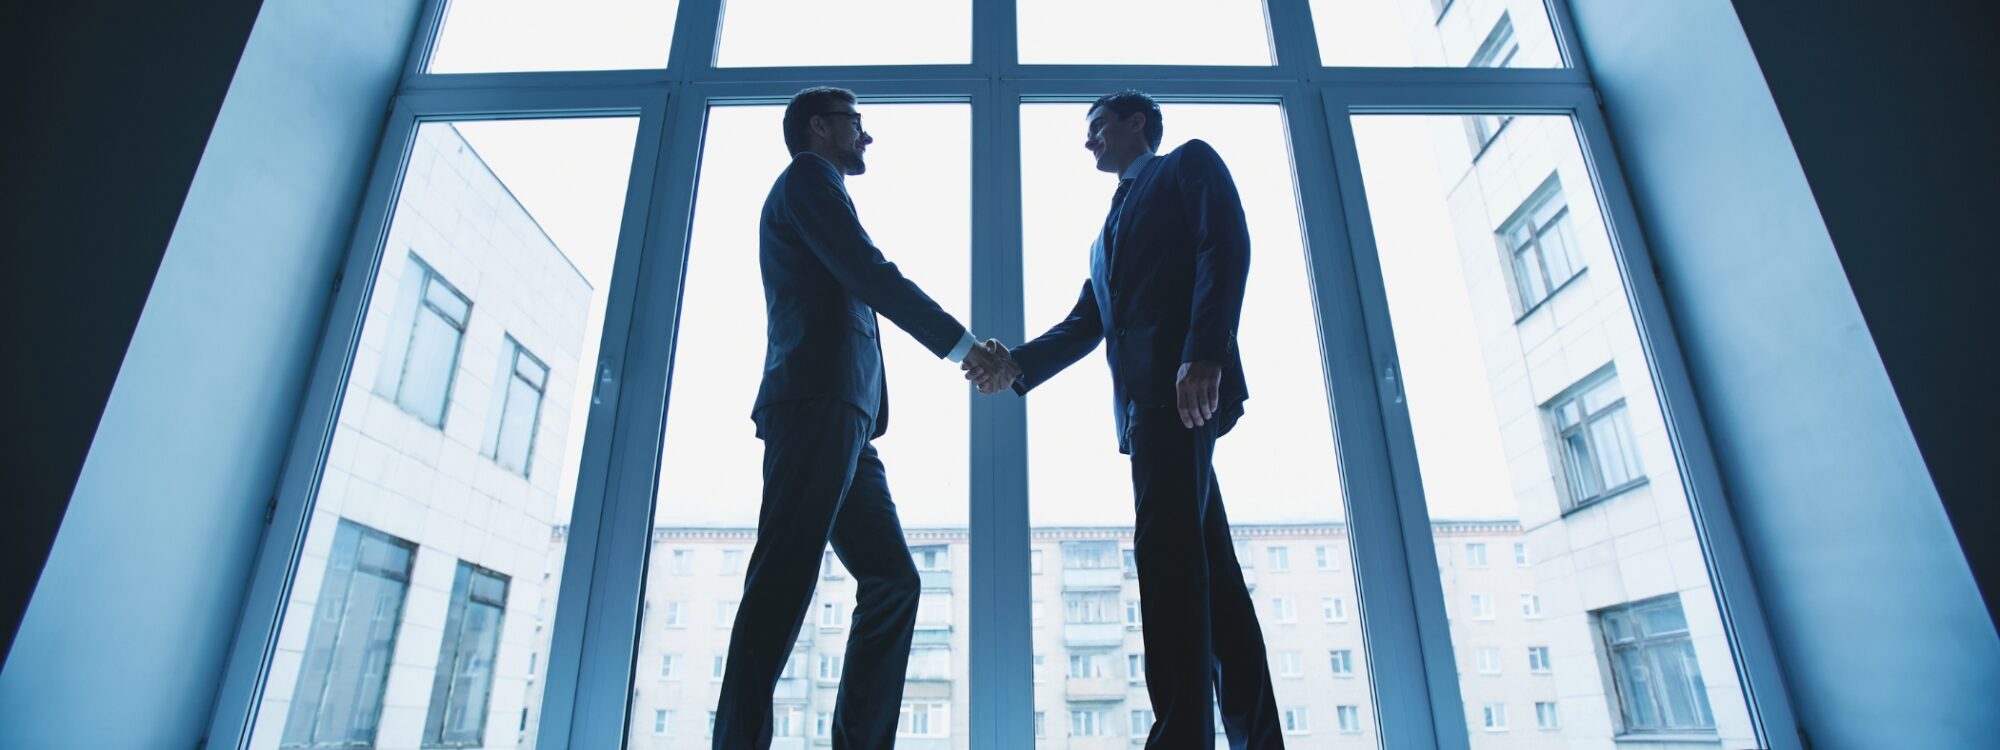 Two individuals in suits shaking hands